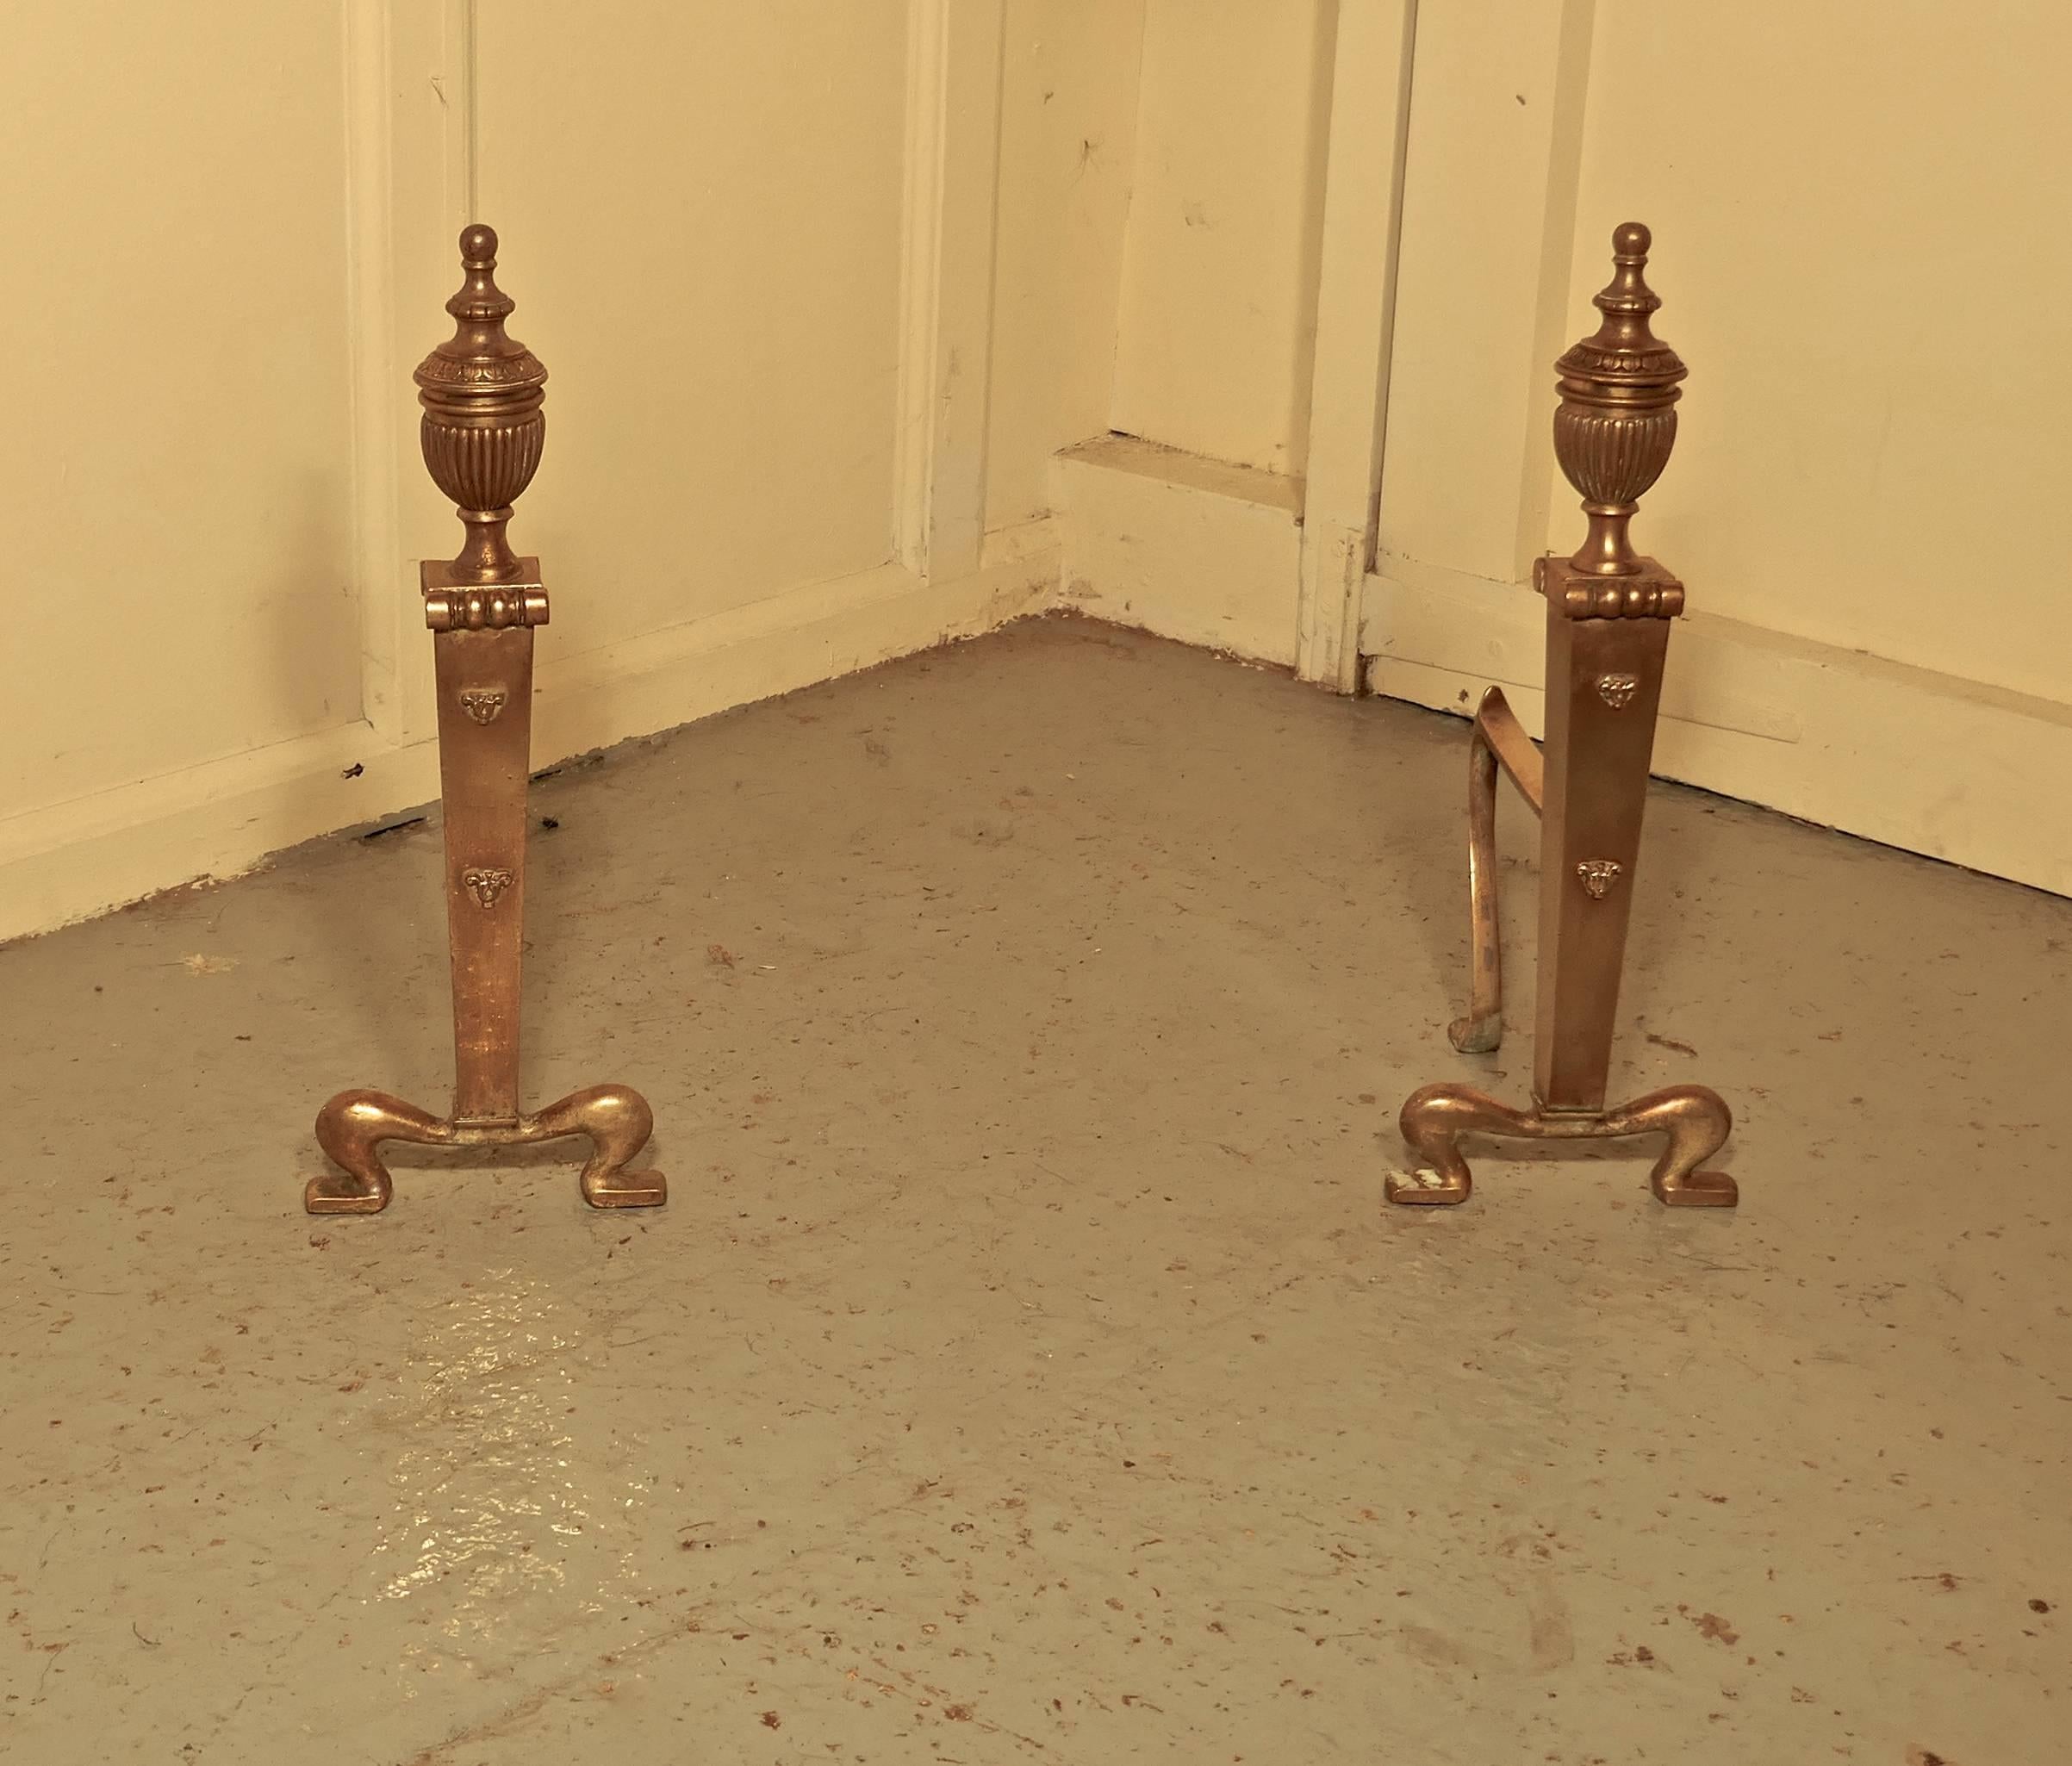 An elegant pair of 19th century brass andirons or fire dogs

This very attractive pair of brass andirons, they have a classical look with tall urns on the top and attractive scrolling feet

The andirons are measure: 17” high, 16” long and 9”